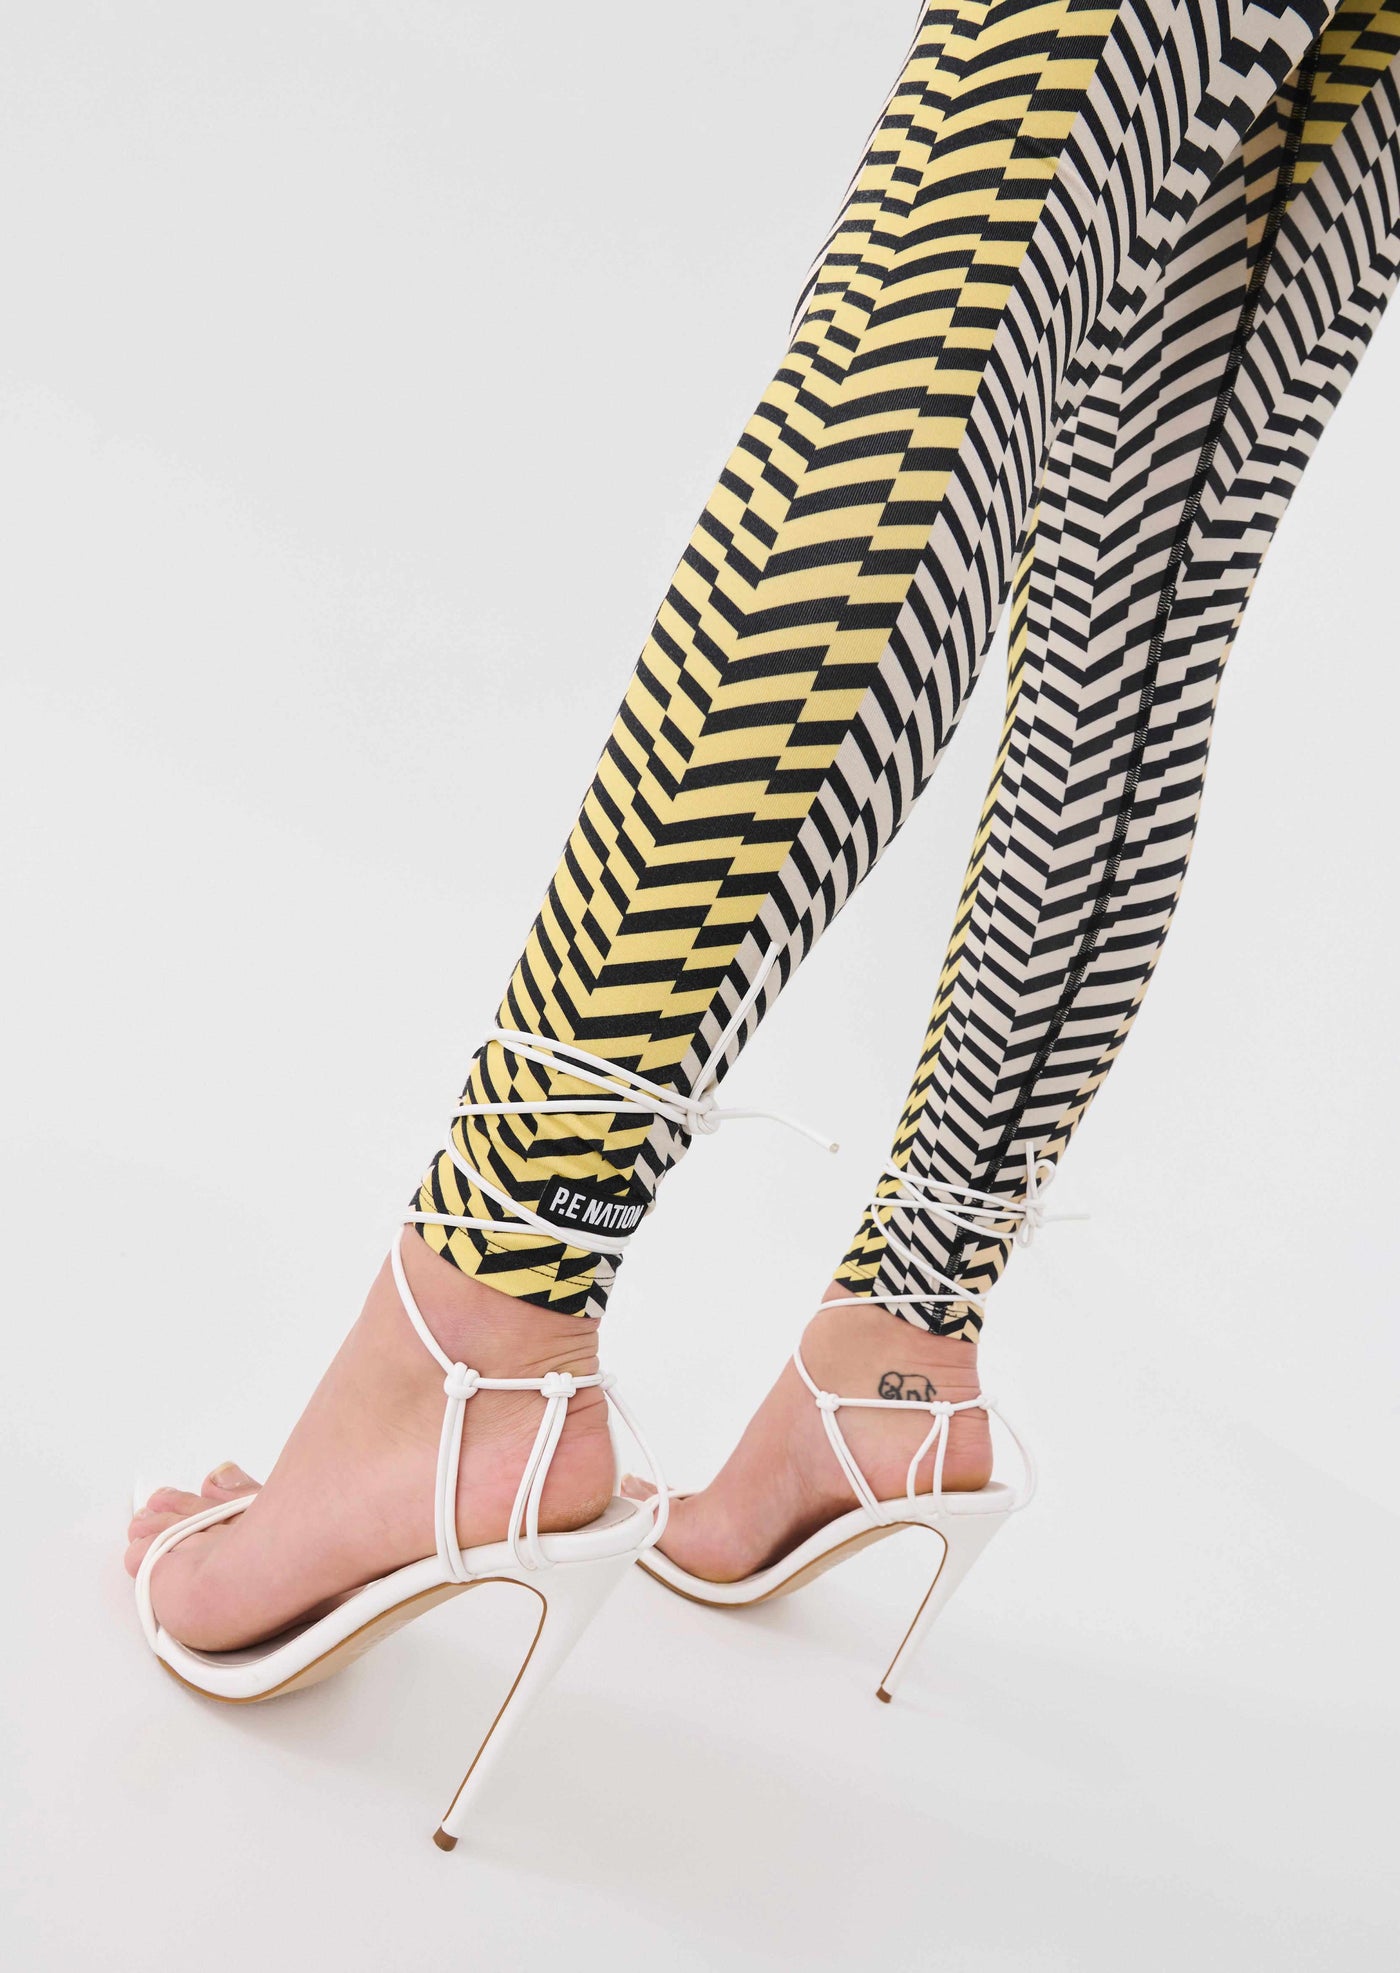 PE Nation Wave Form Leggings  Anthropologie Singapore - Women's Clothing,  Accessories & Home